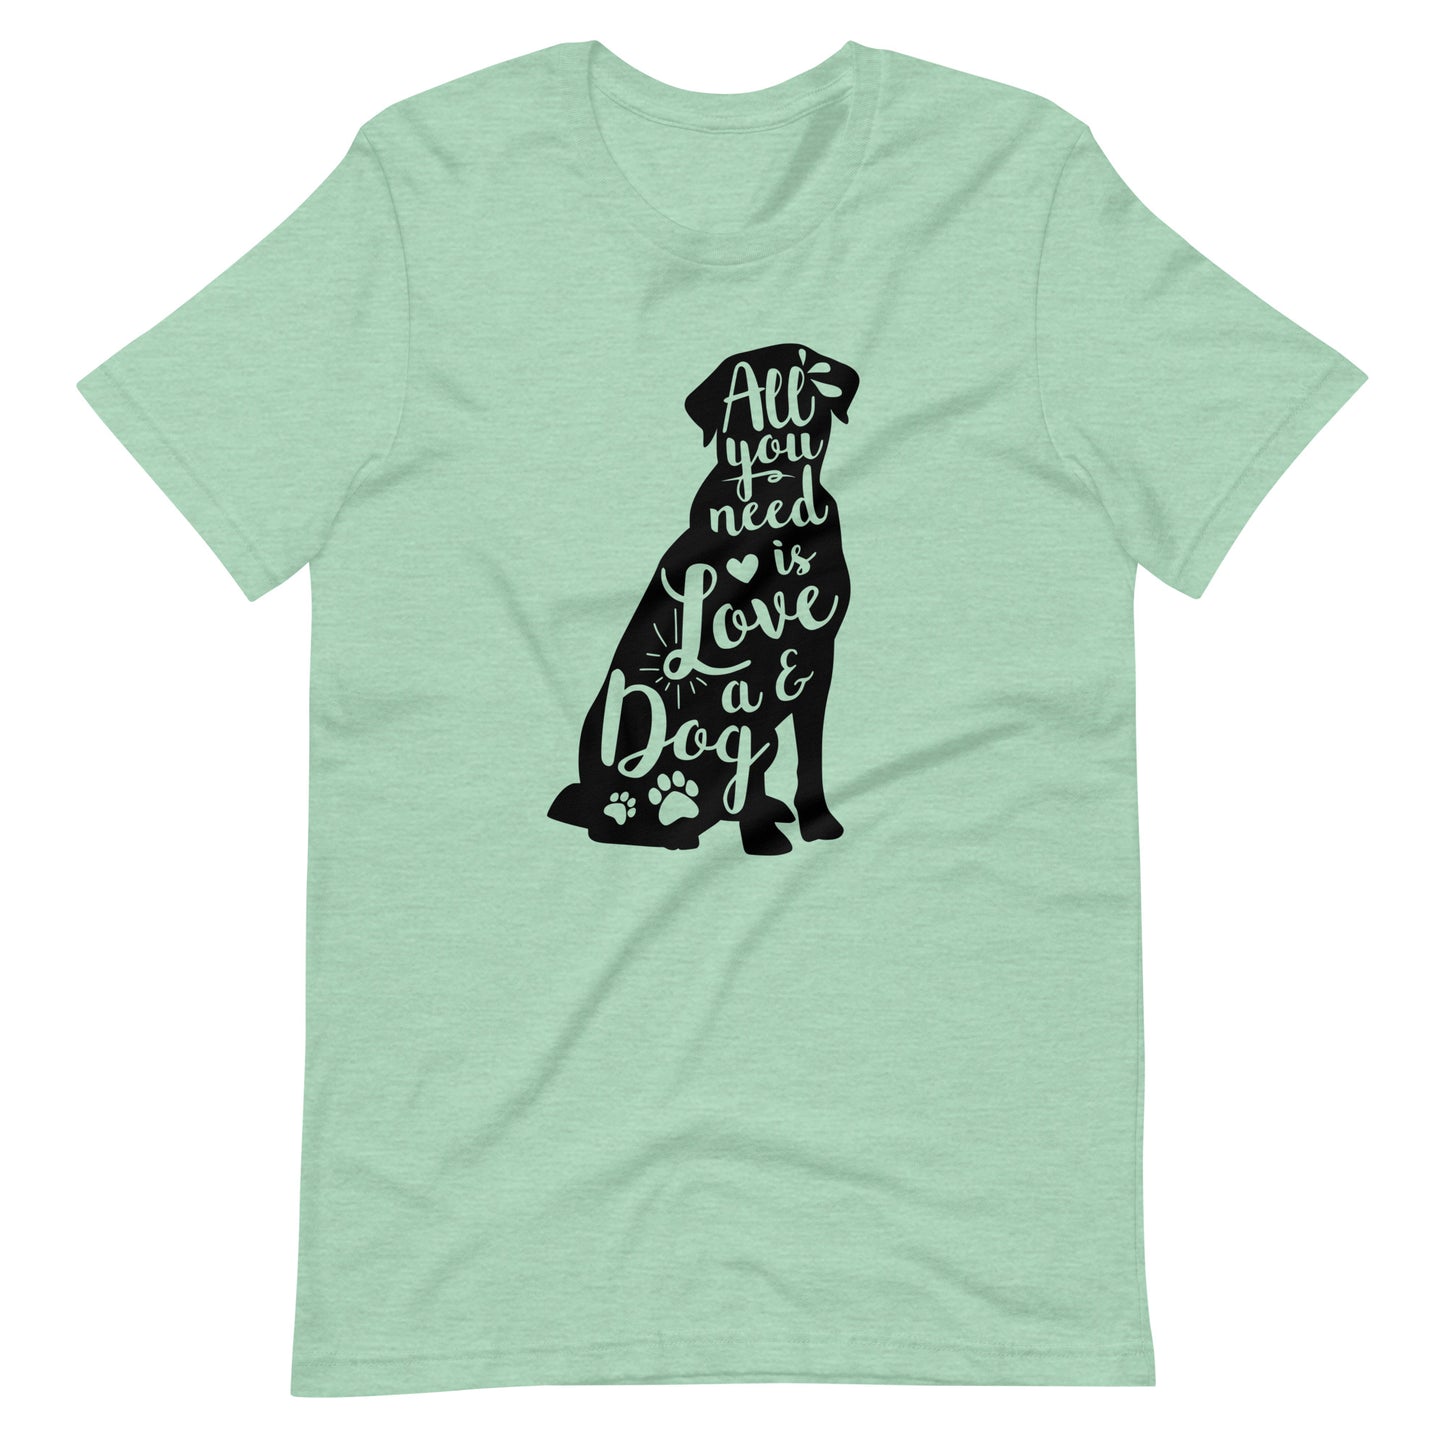 All You Need Is Love And a Dog T-Shirt for Dog Lovers